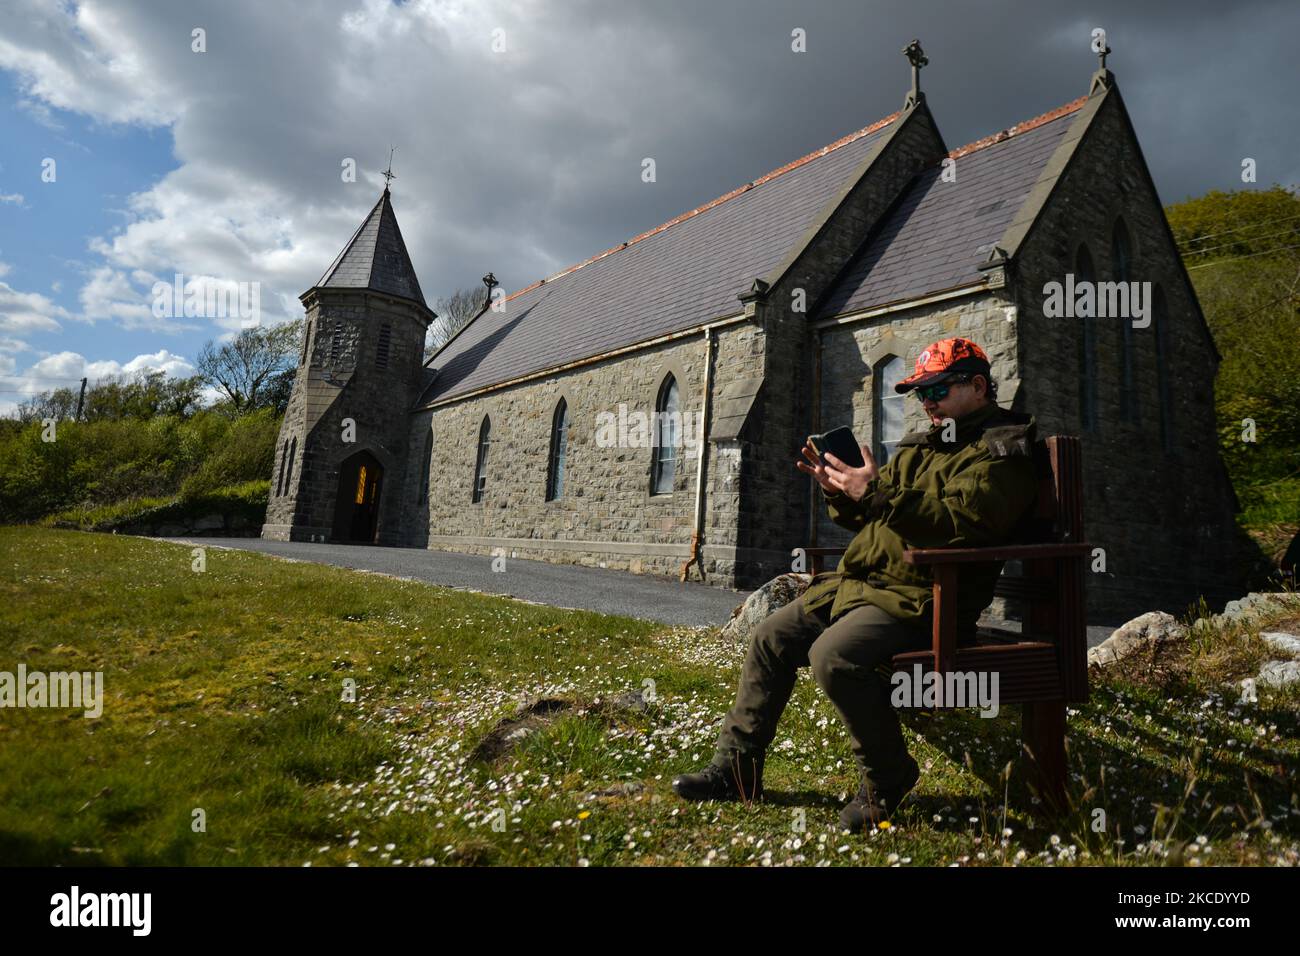 Father Krzysztof Sikora checks his mobile phone outside St James's Church, in Cashel, Connemara. Geographically, Roundstone parish is considered Ireland's largest parish and stretches from the Gurteen Beaches to the Twelve Bens and Mám Tuirc Mountains. Until the 1990s, the parish was served by three priests, now there is only one to look after five churches. The current Parish Priest, a Polish born Fr Krzysztof Sikora, is a member of the religious congregation of the Divine Word Missionaries. After years of working as a missionary in the Philippines, Germany and Poland, he settled in Ireland i Stock Photo